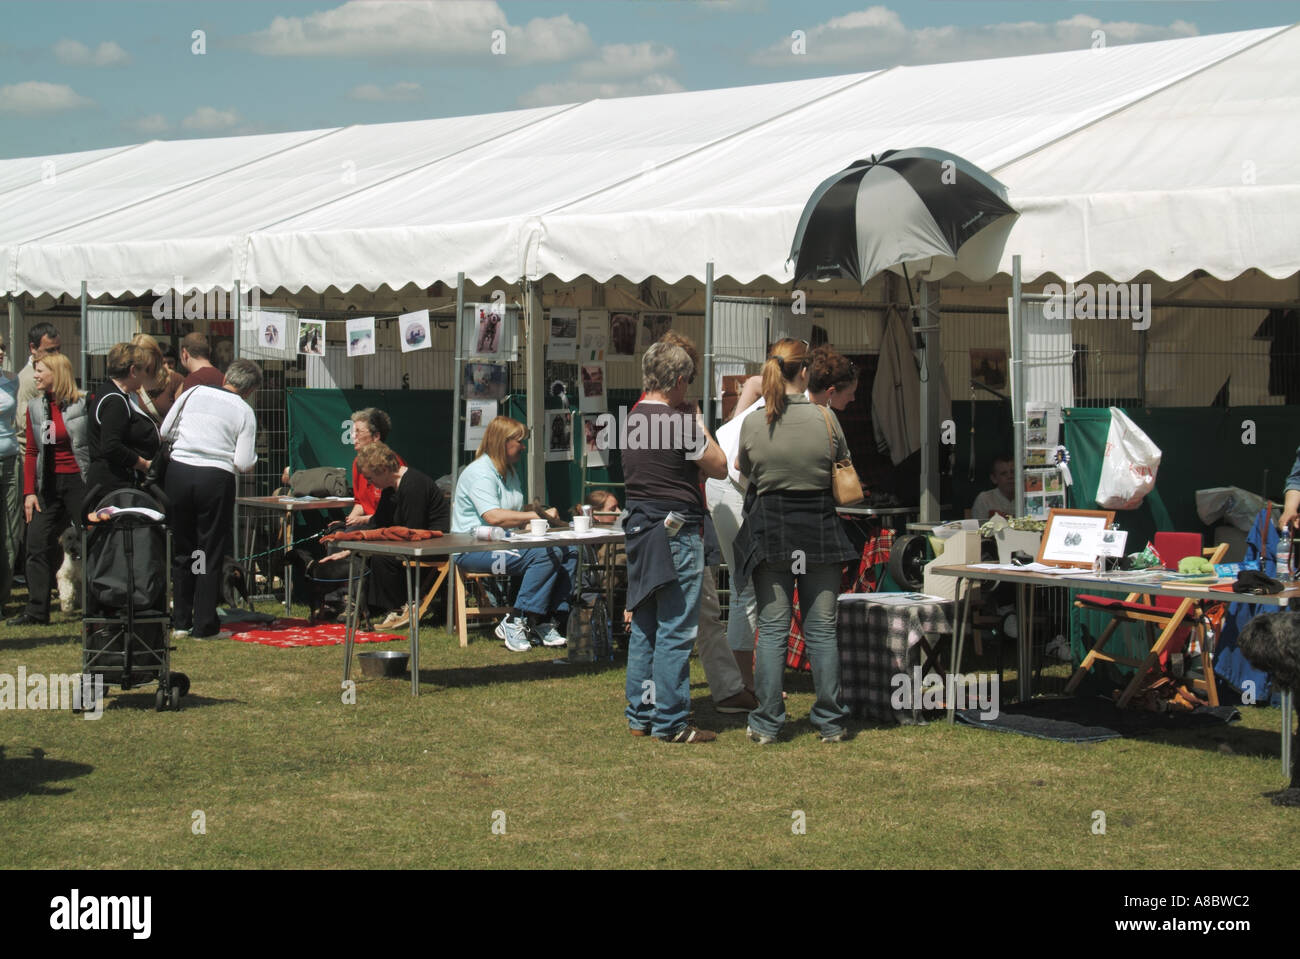 England dog show event traders stalls under canvas with punters milling around Stock Photo